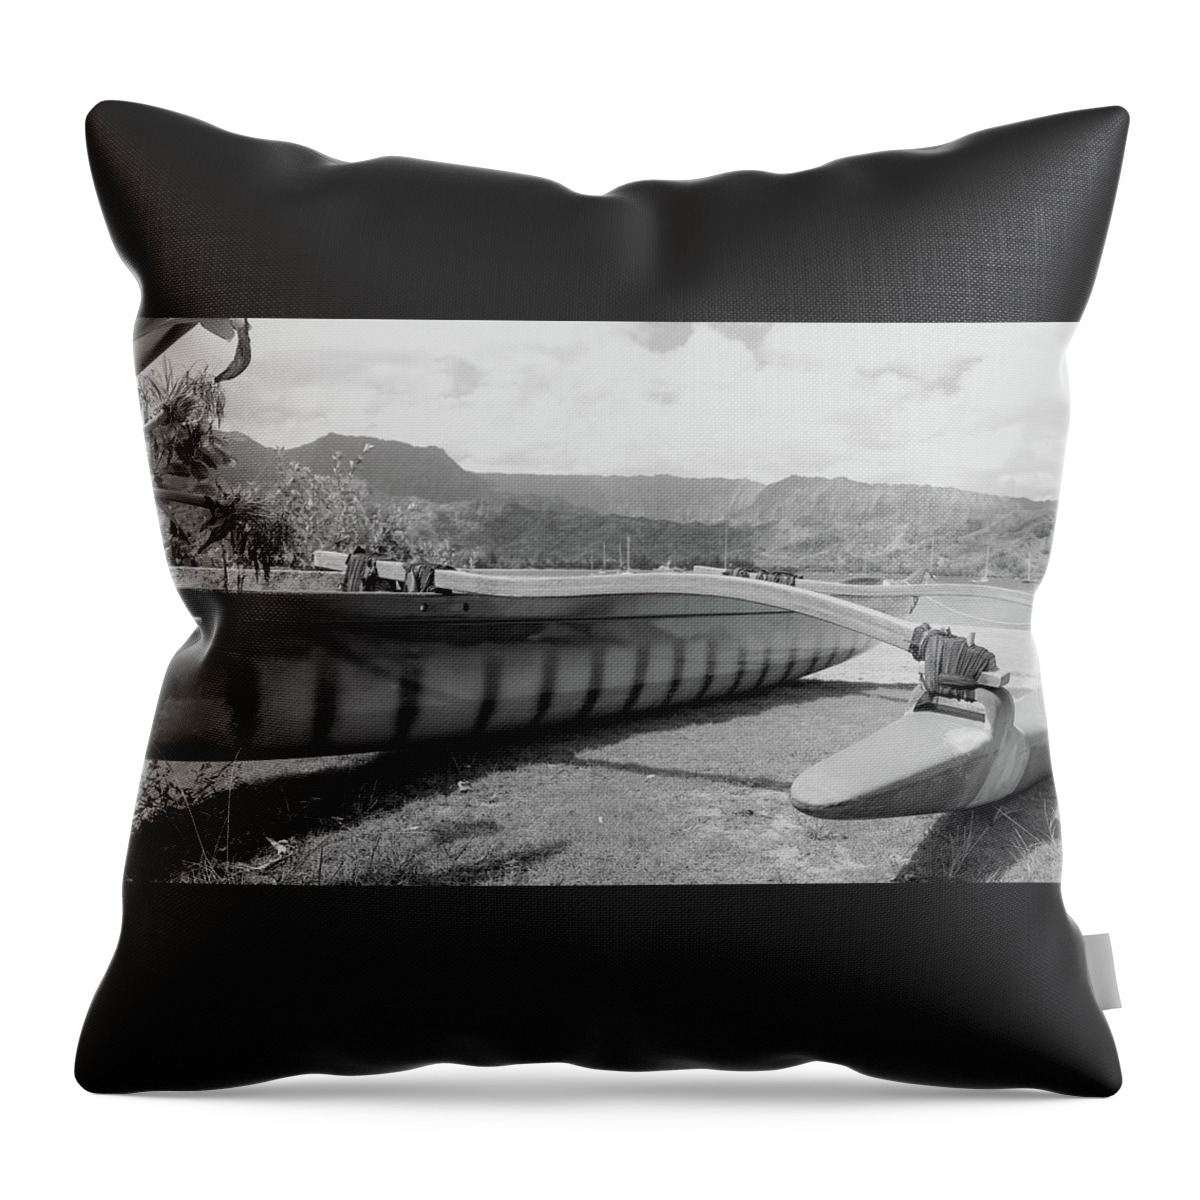 Hanalei Throw Pillow featuring the photograph Hanalei Canoe by Tony Spencer